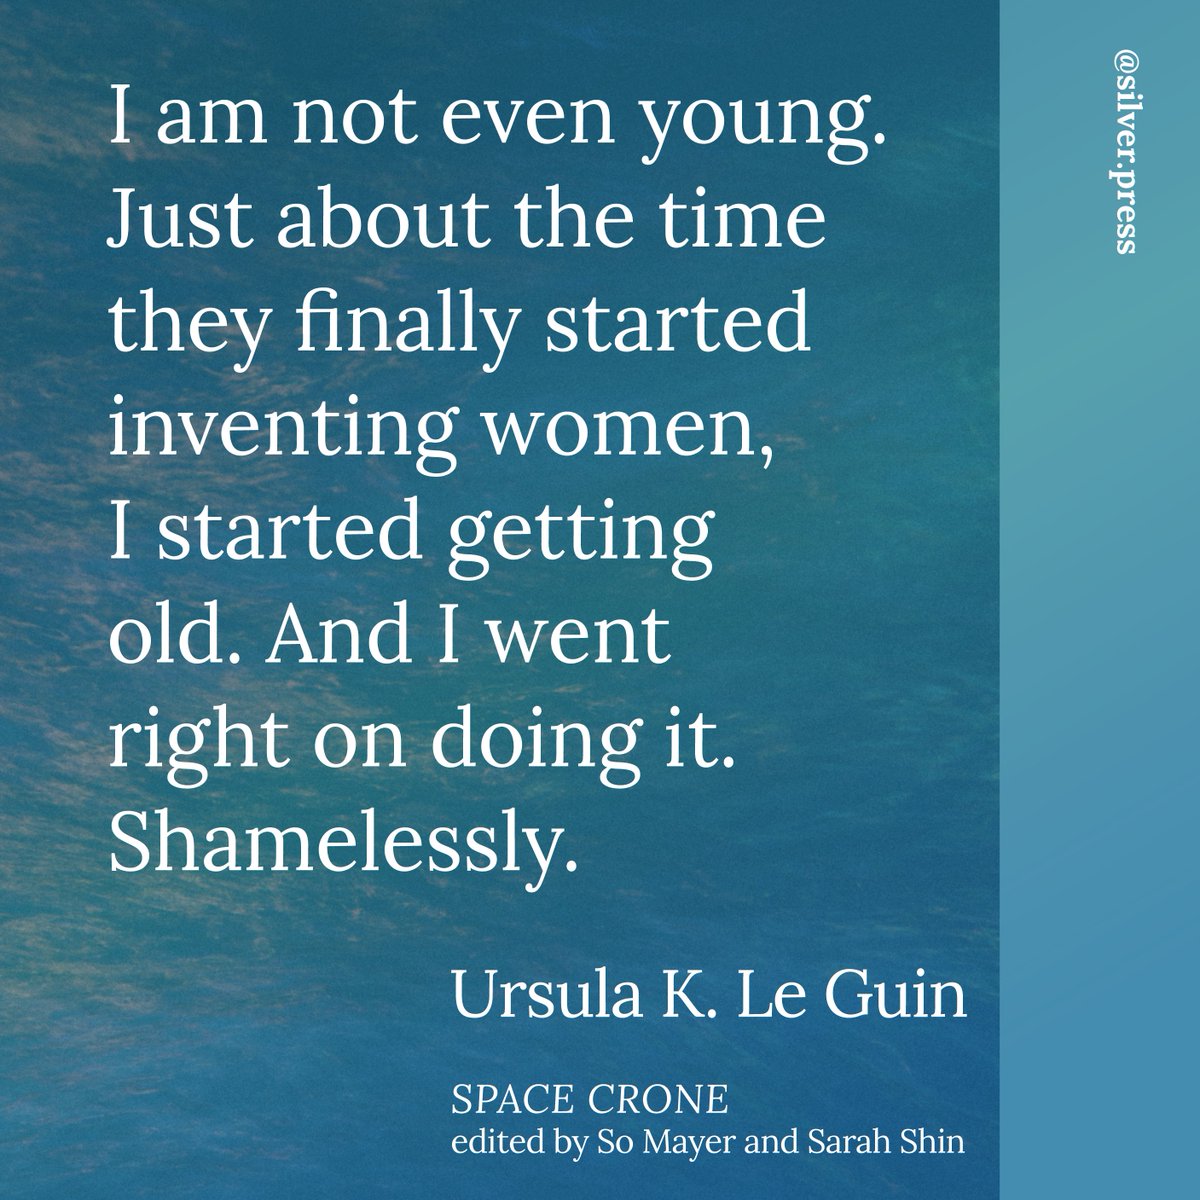 Ursula K. Le Guin on ageing. 

From SPACE CRONE by @ursulakleguin, a collection of her writings on feminism and gender edited and introduced by @such_mayer and Sarah Shin